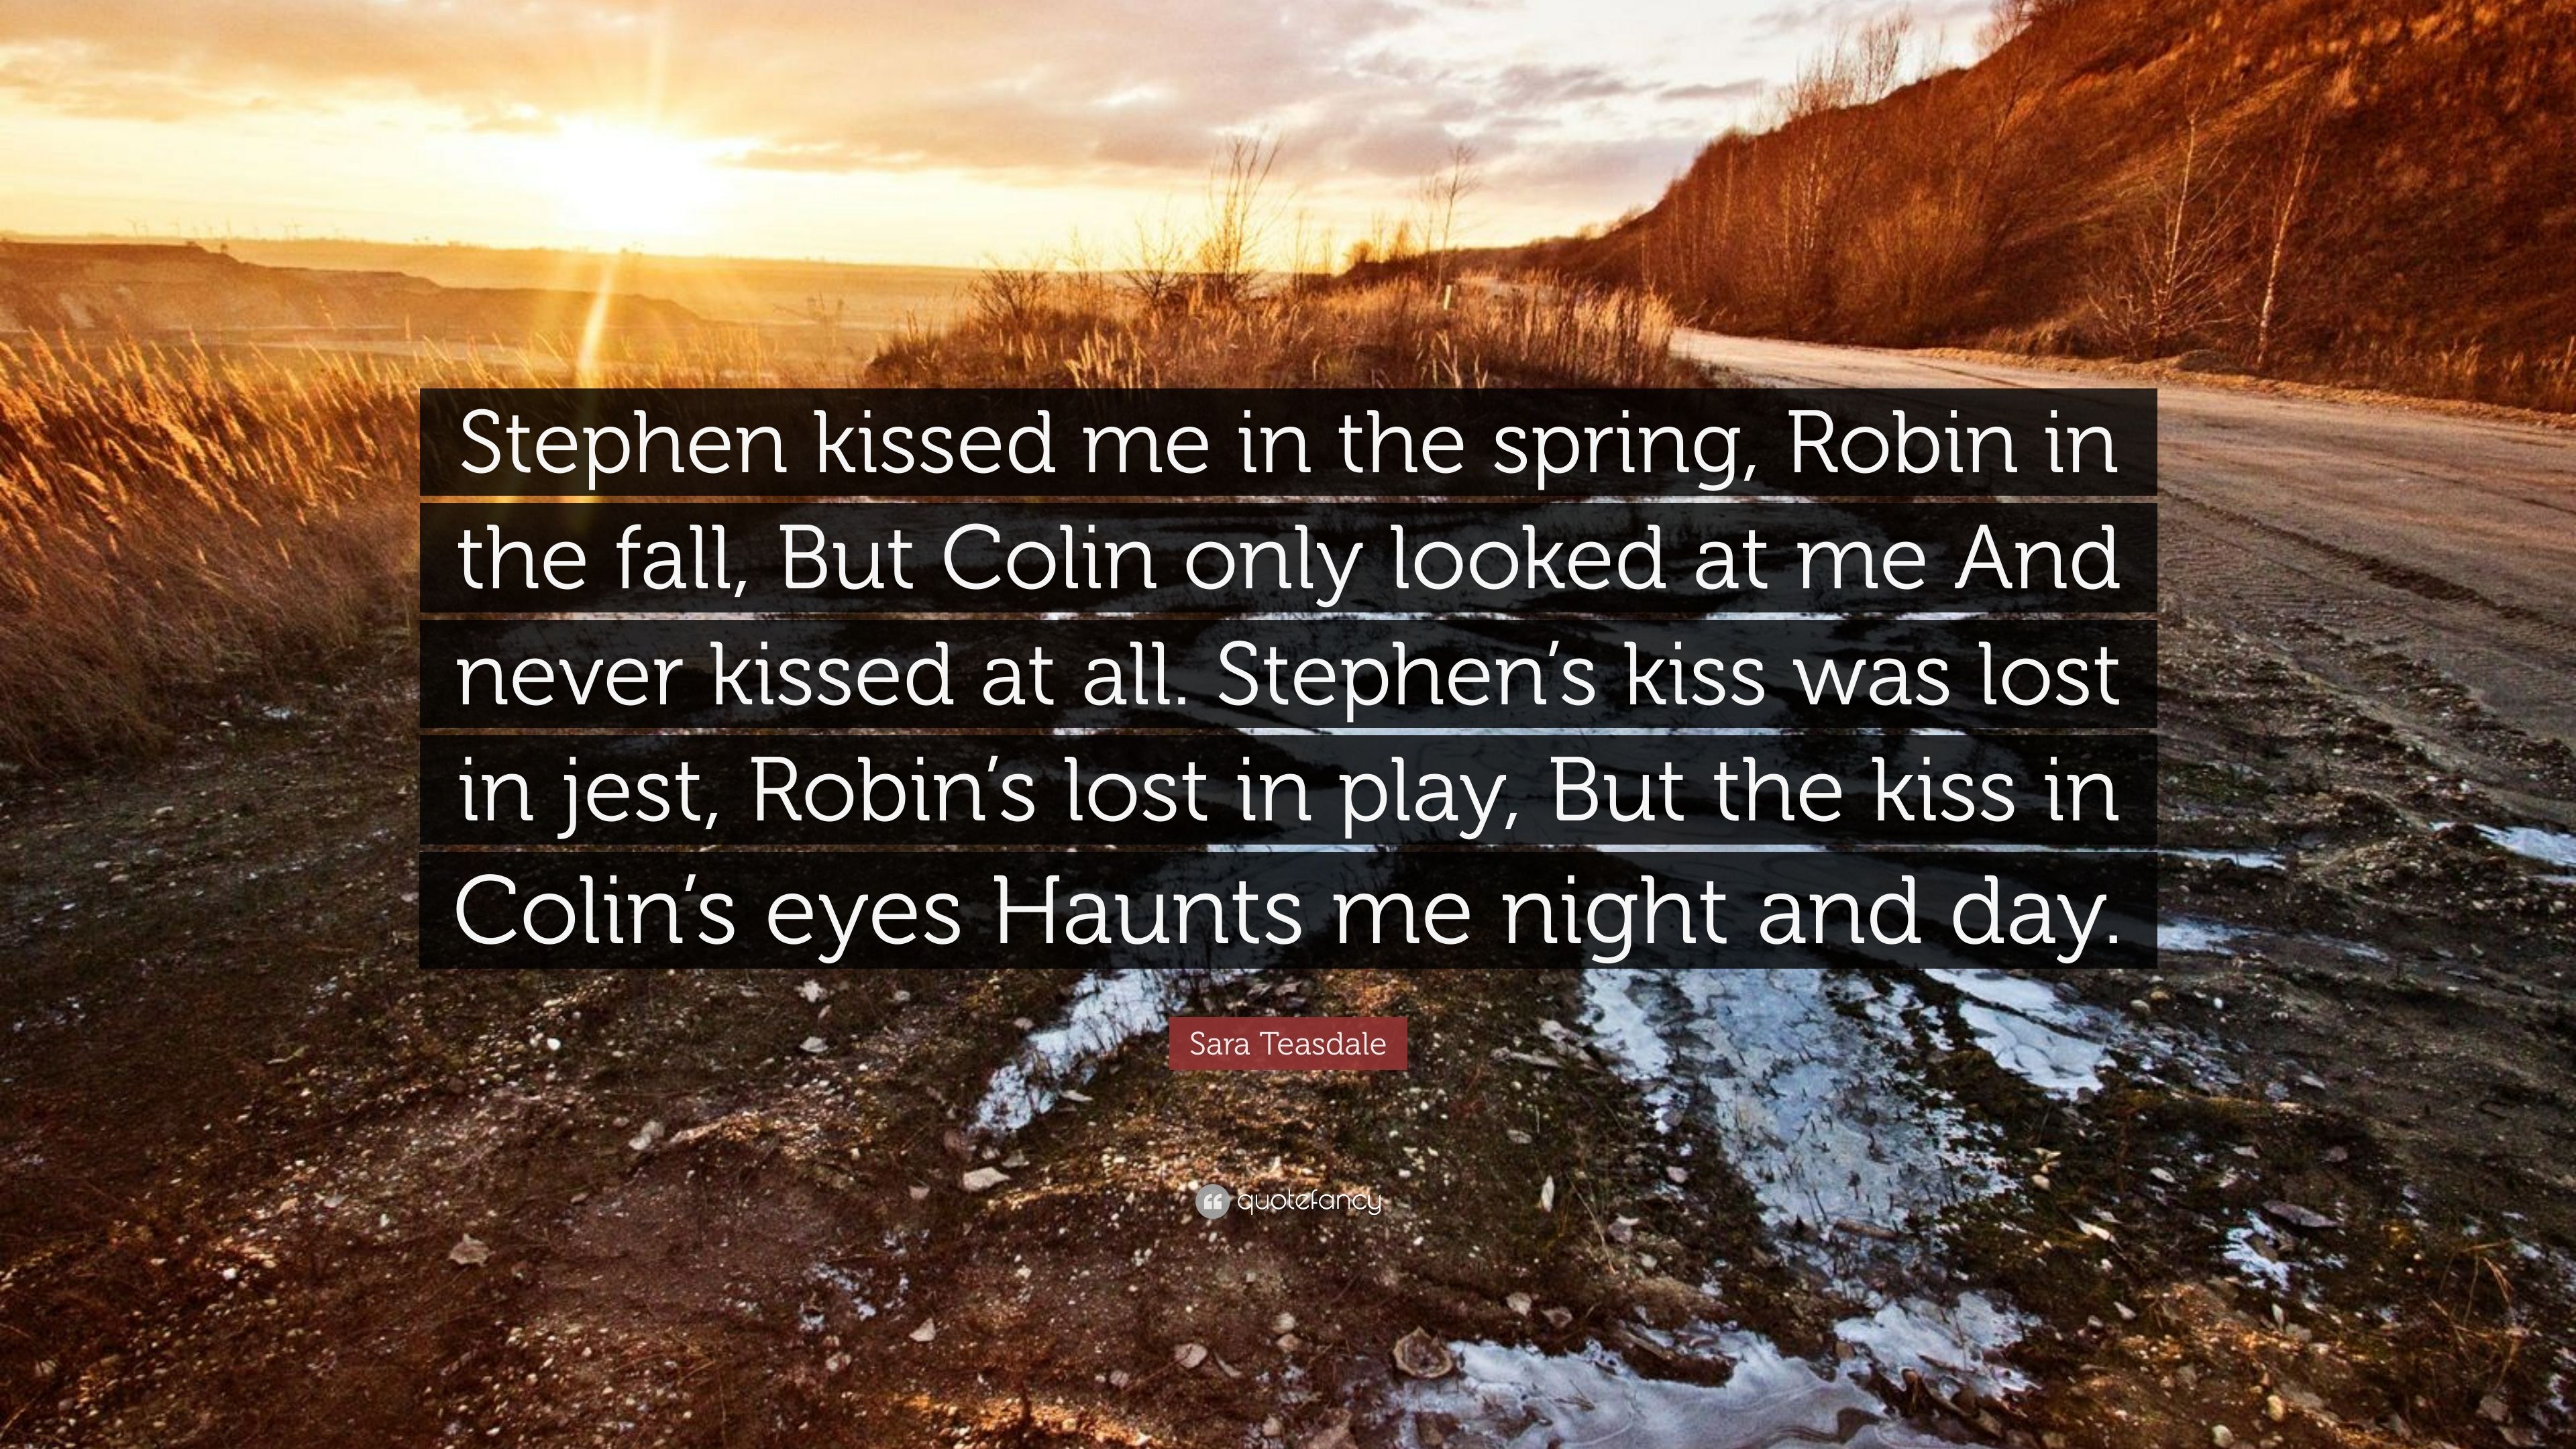 Sara Teasdale Quote: “Stephen kissed me in the spring, Robin